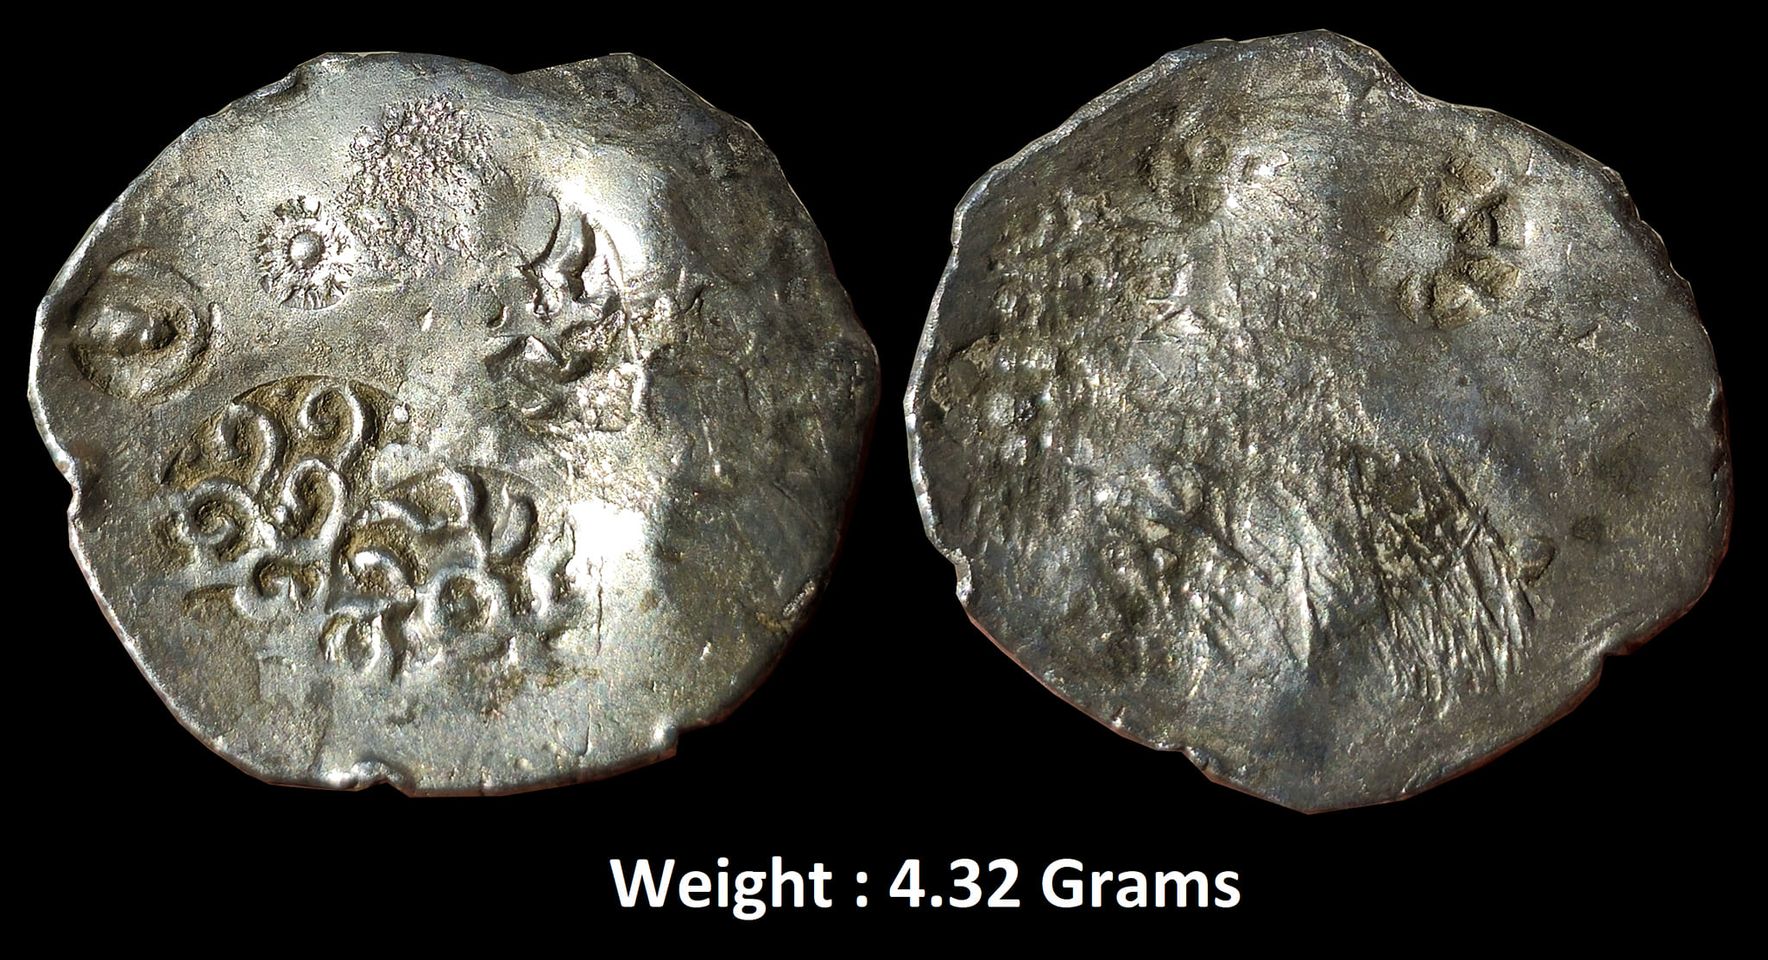 Archaic Punch Marked Coinage,
Attributed to Kashi Janapada, Very RARE Silver Vimshatika,
Obverse : 2 major geometric marks stamped across with two small bankers’ marks and two fade out marks ; Reverse : Various small banker marks.
Weight : 4.32 Grams (Rajgor Series 55).